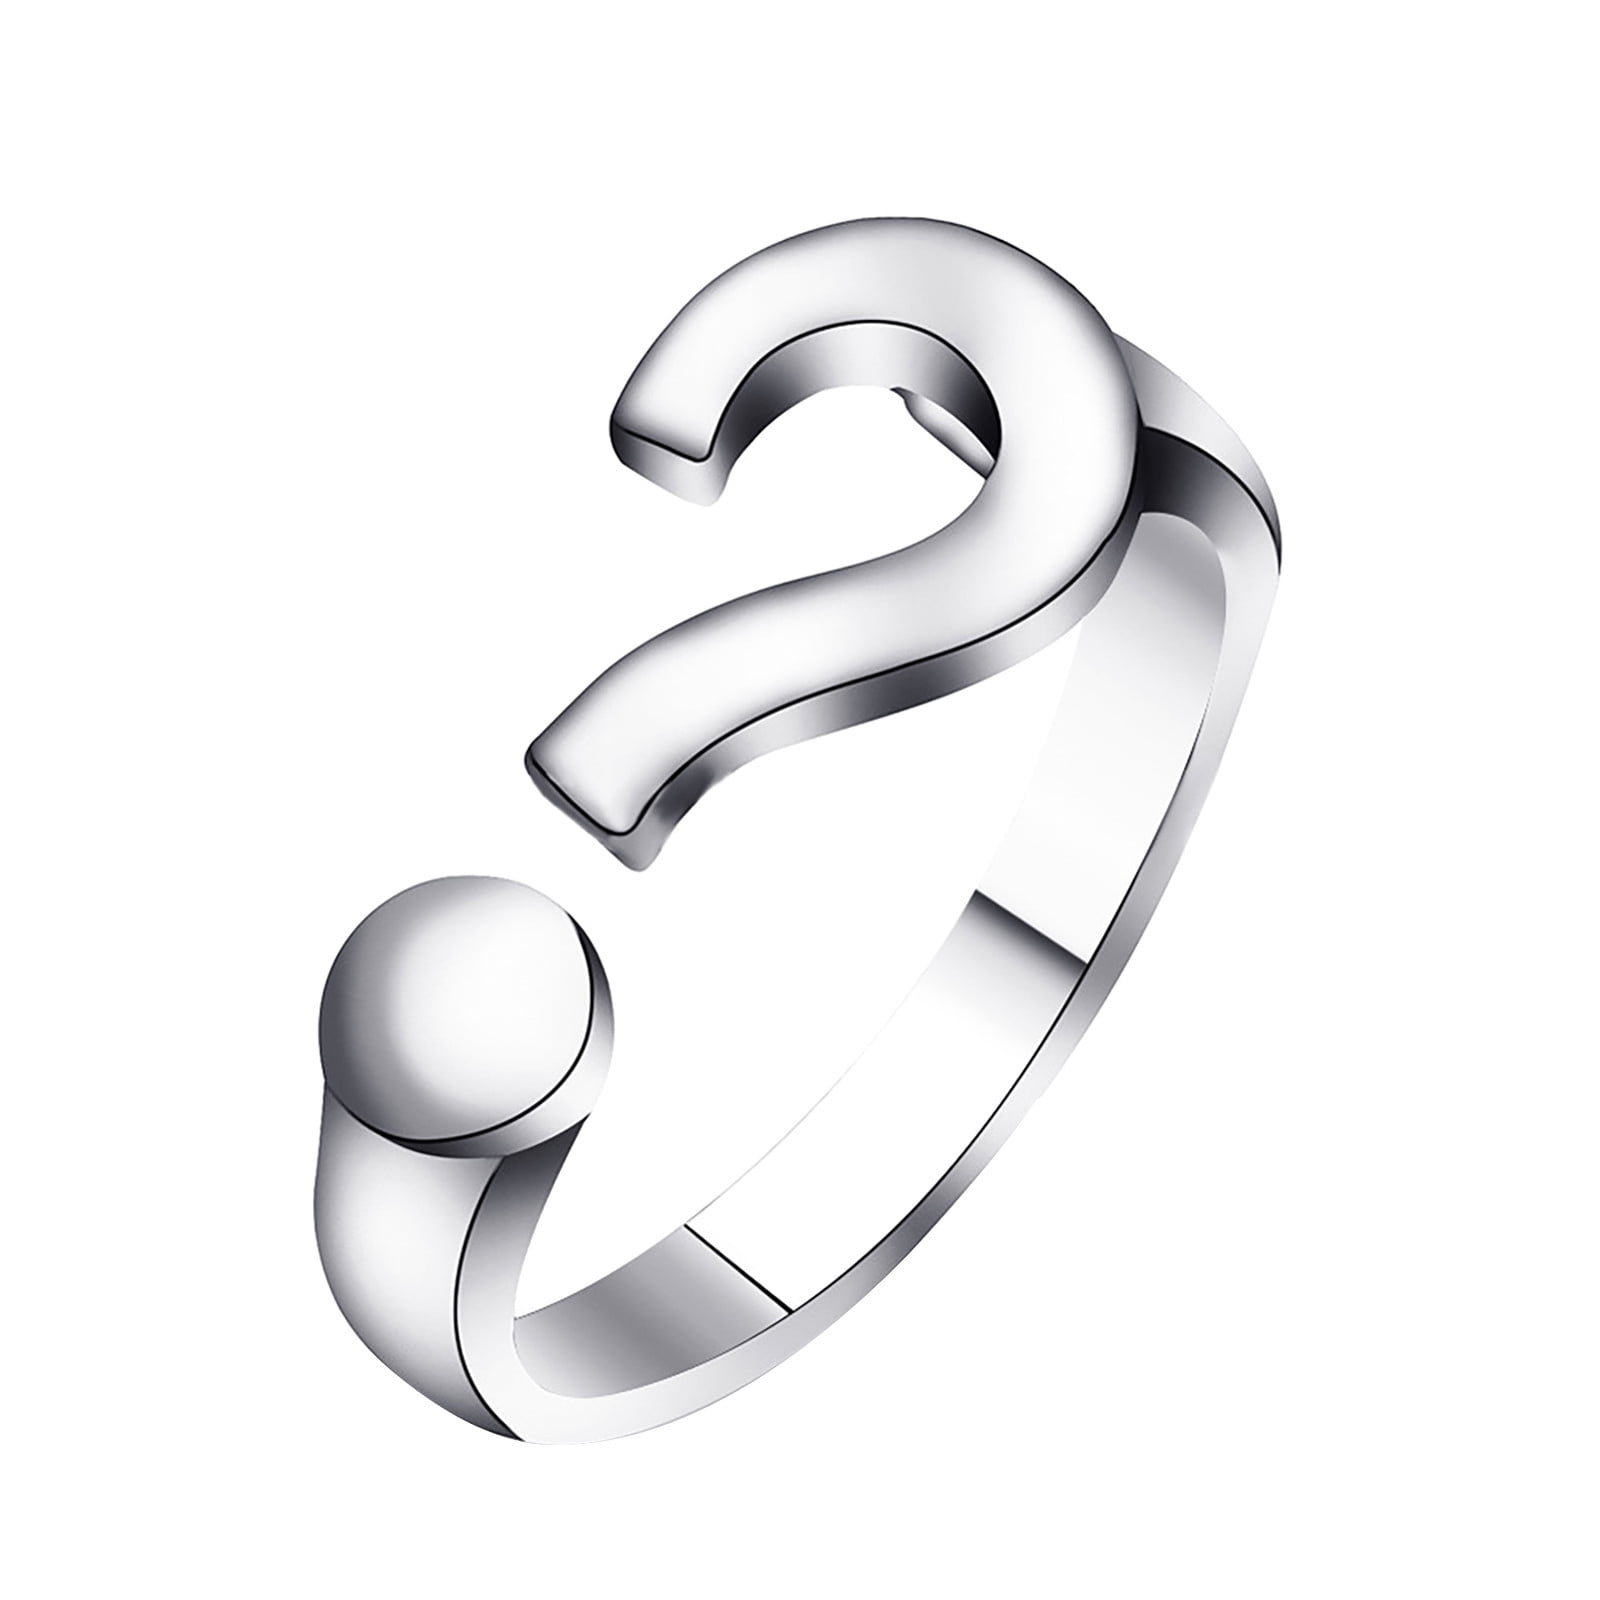 Adjustable Question Mark Ring Handmade Band Ring Solid 925 Sterling Silver SR-2 